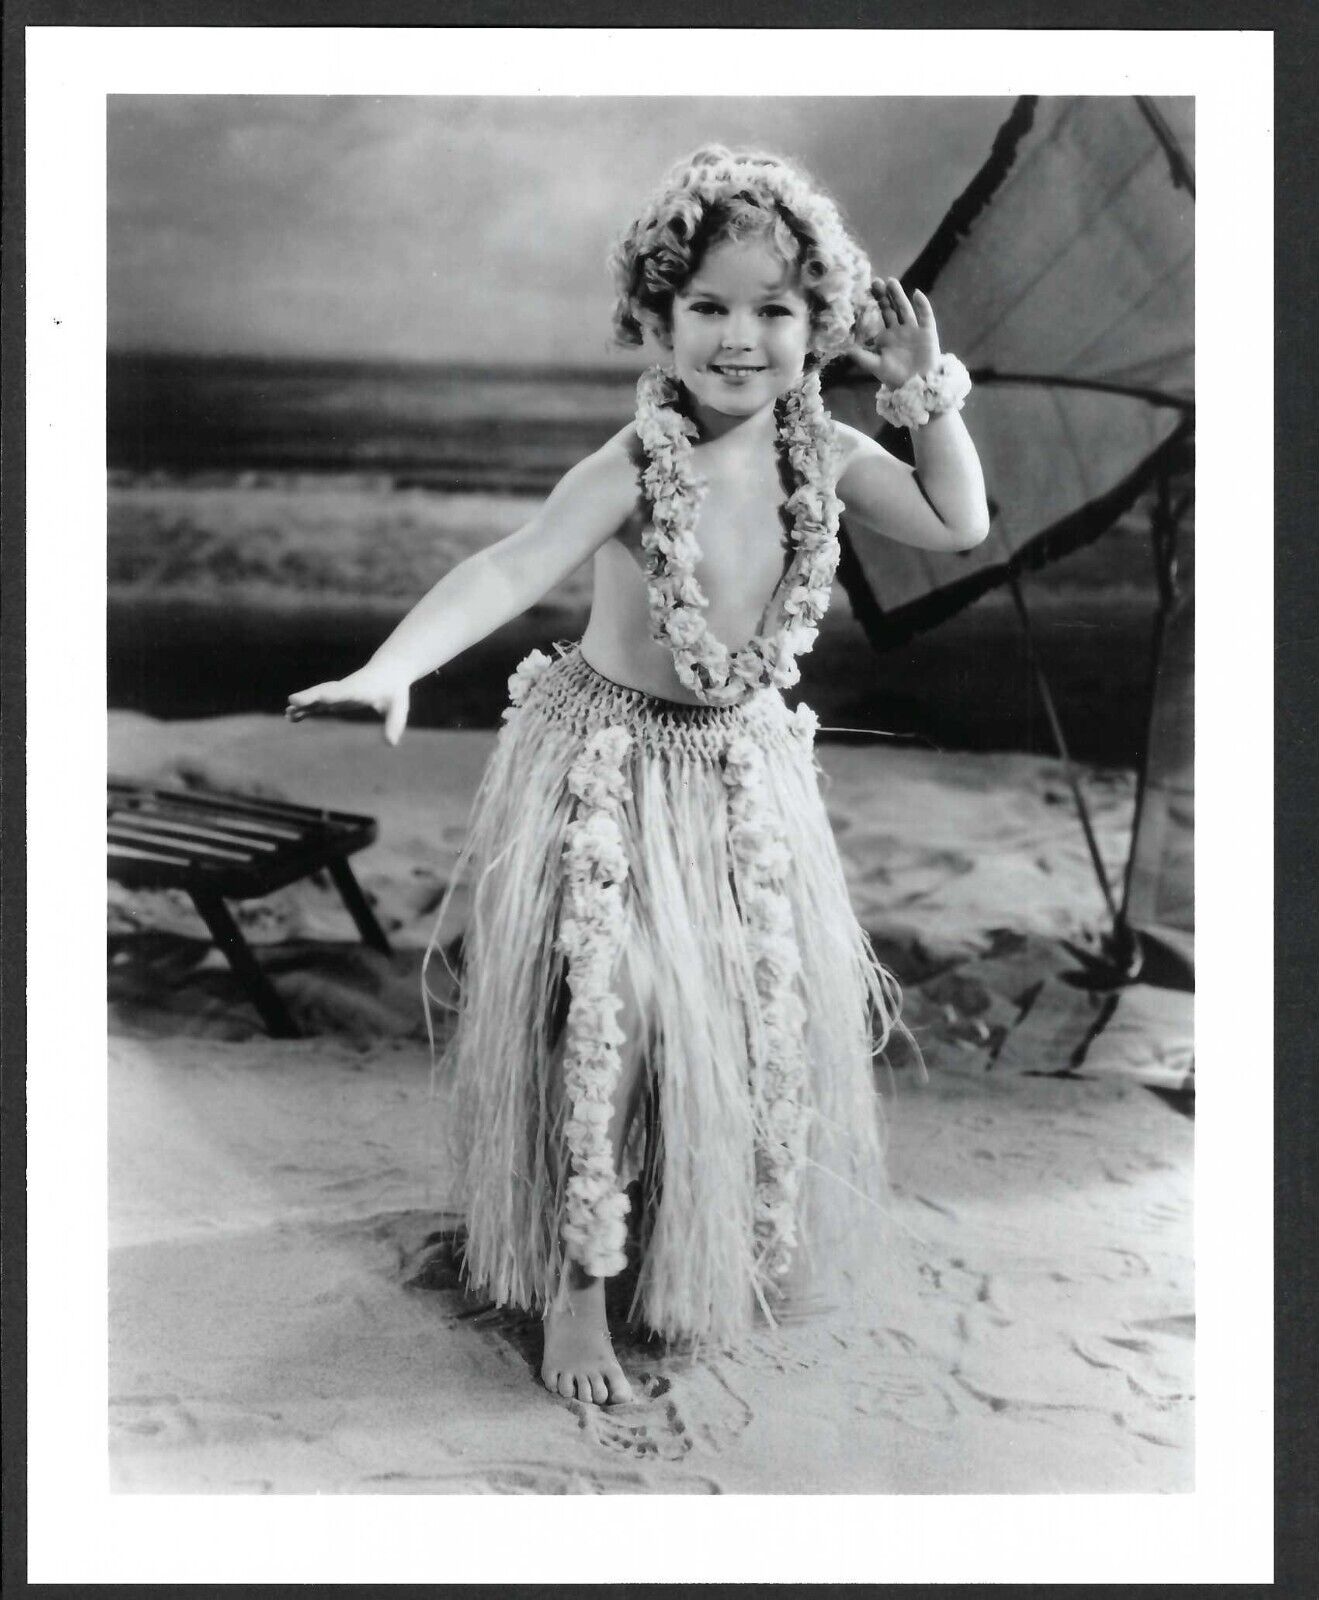 HOLLYWOOD SHIRLEY TEMPLE ACTRESS DANCING VINTAGE ORIG PHOTO